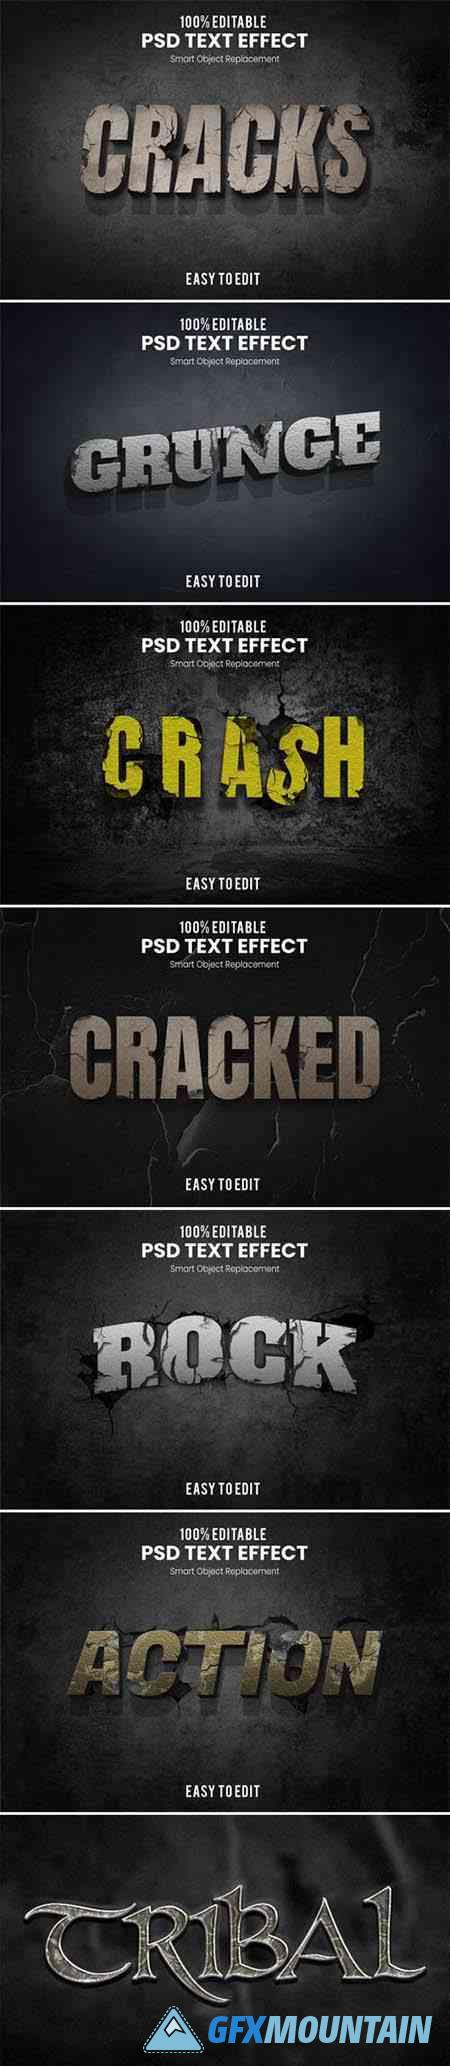 7 Grunge and Cracks PSD Text Effects